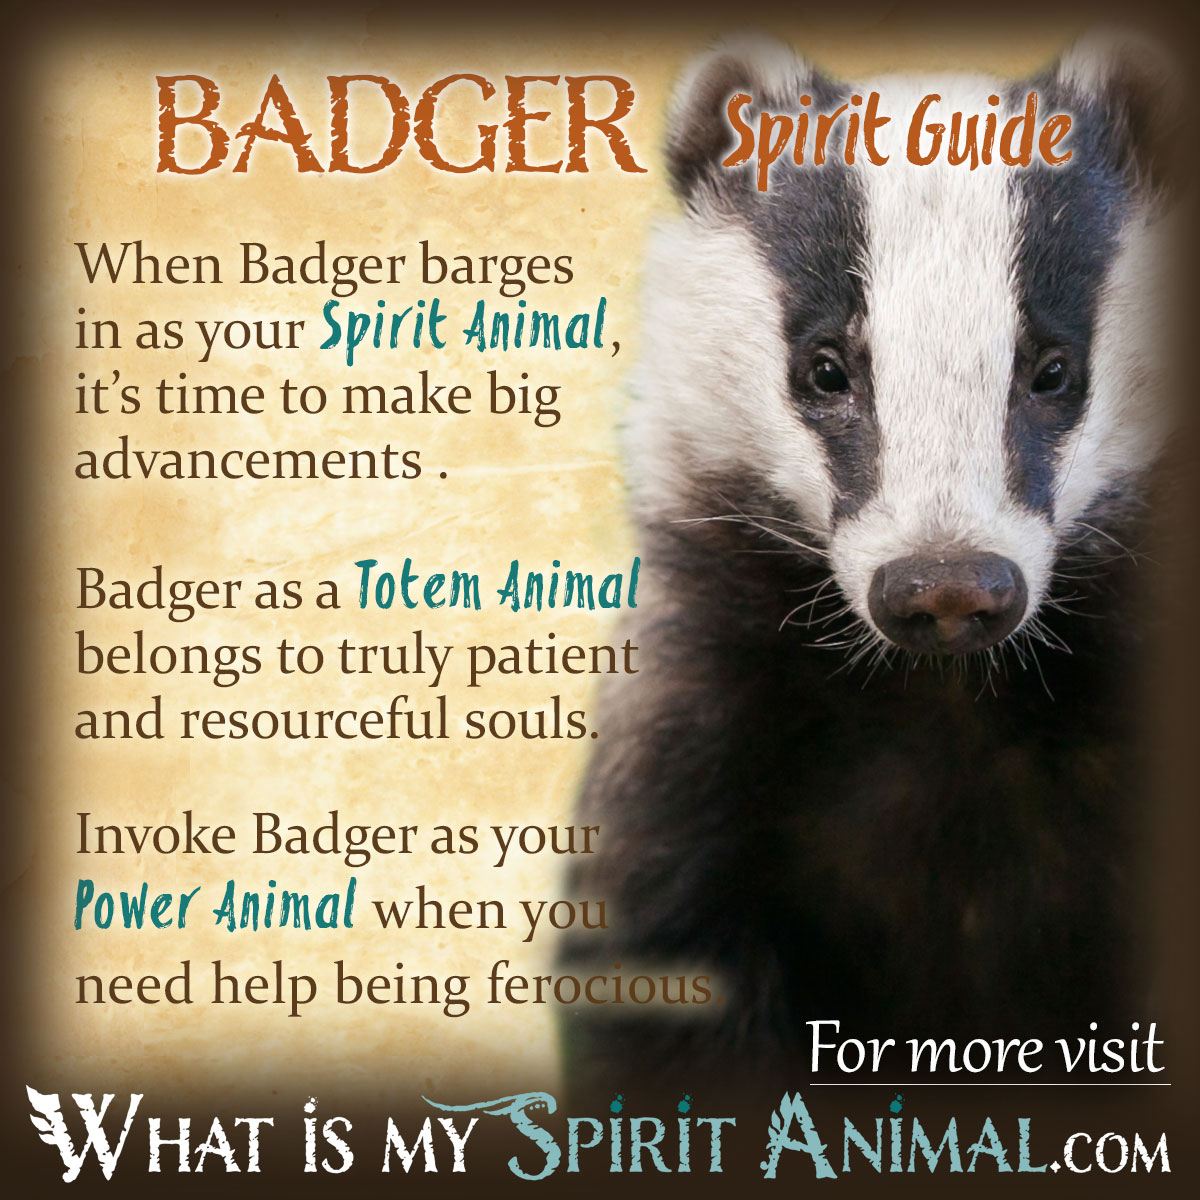 What is a badger symbolize?